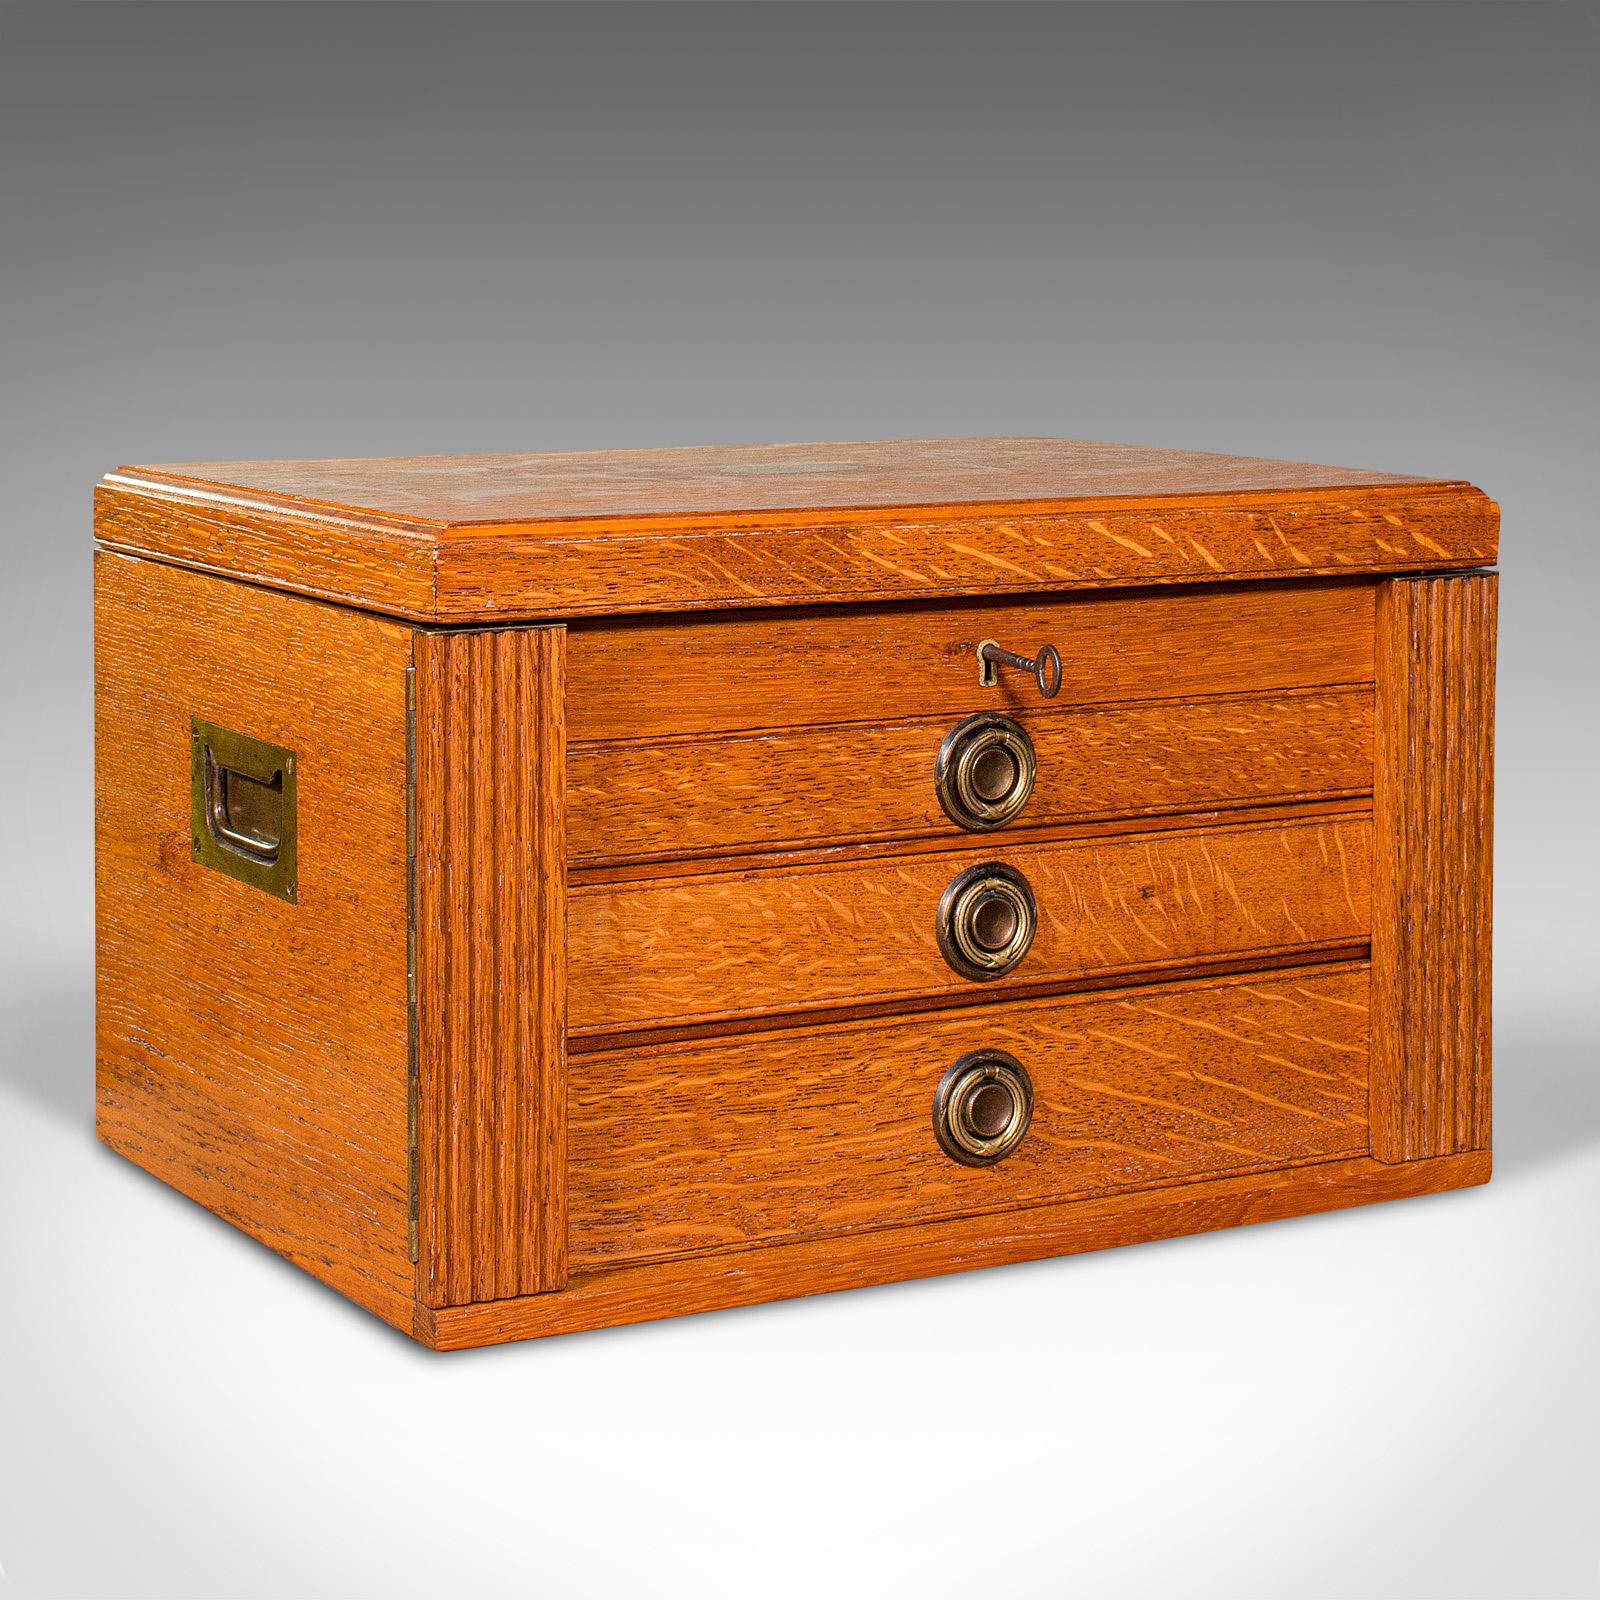 This is an antique collector's specimen case. An English, oak chest or jewellery box with Wellington style locking arms, dating to the Edwardian period, circa 1910.

Fascinating specimen case with attractive finish
Displays a desirable aged